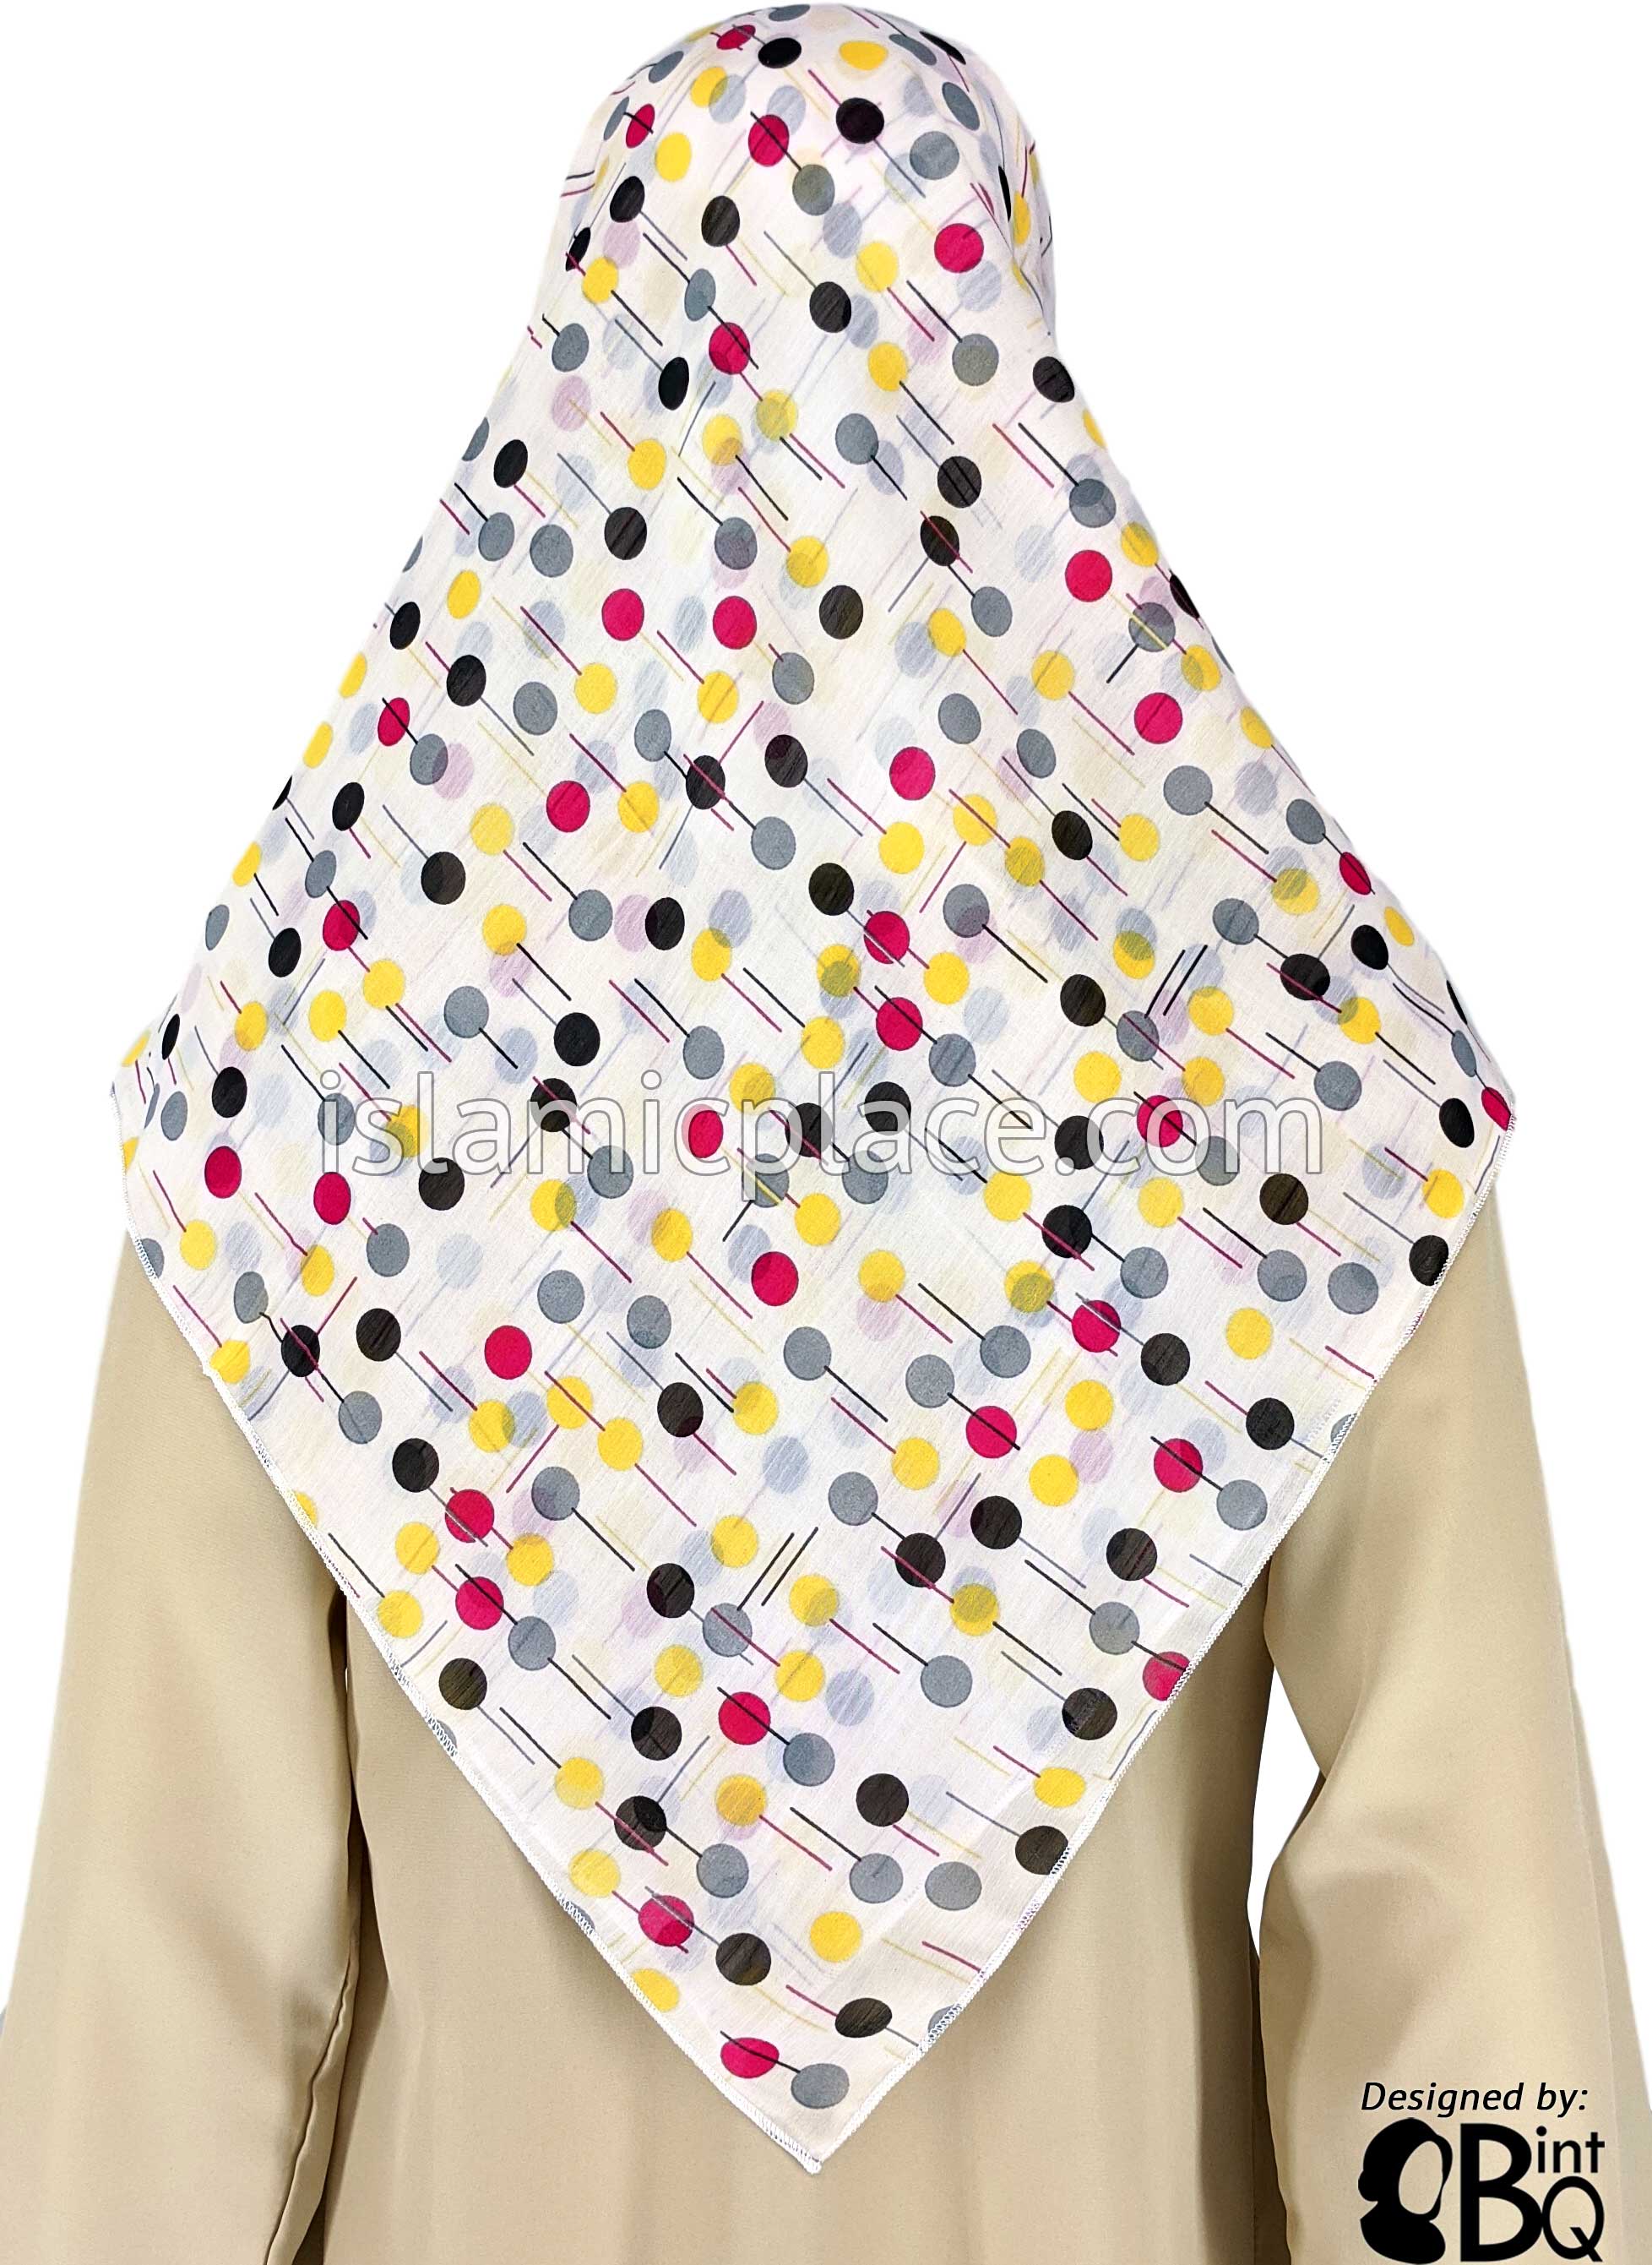 Yellow, Fuchsia, Gray, And Black Polka Dots On White Base With Lines - 45" Square Printed Khimar